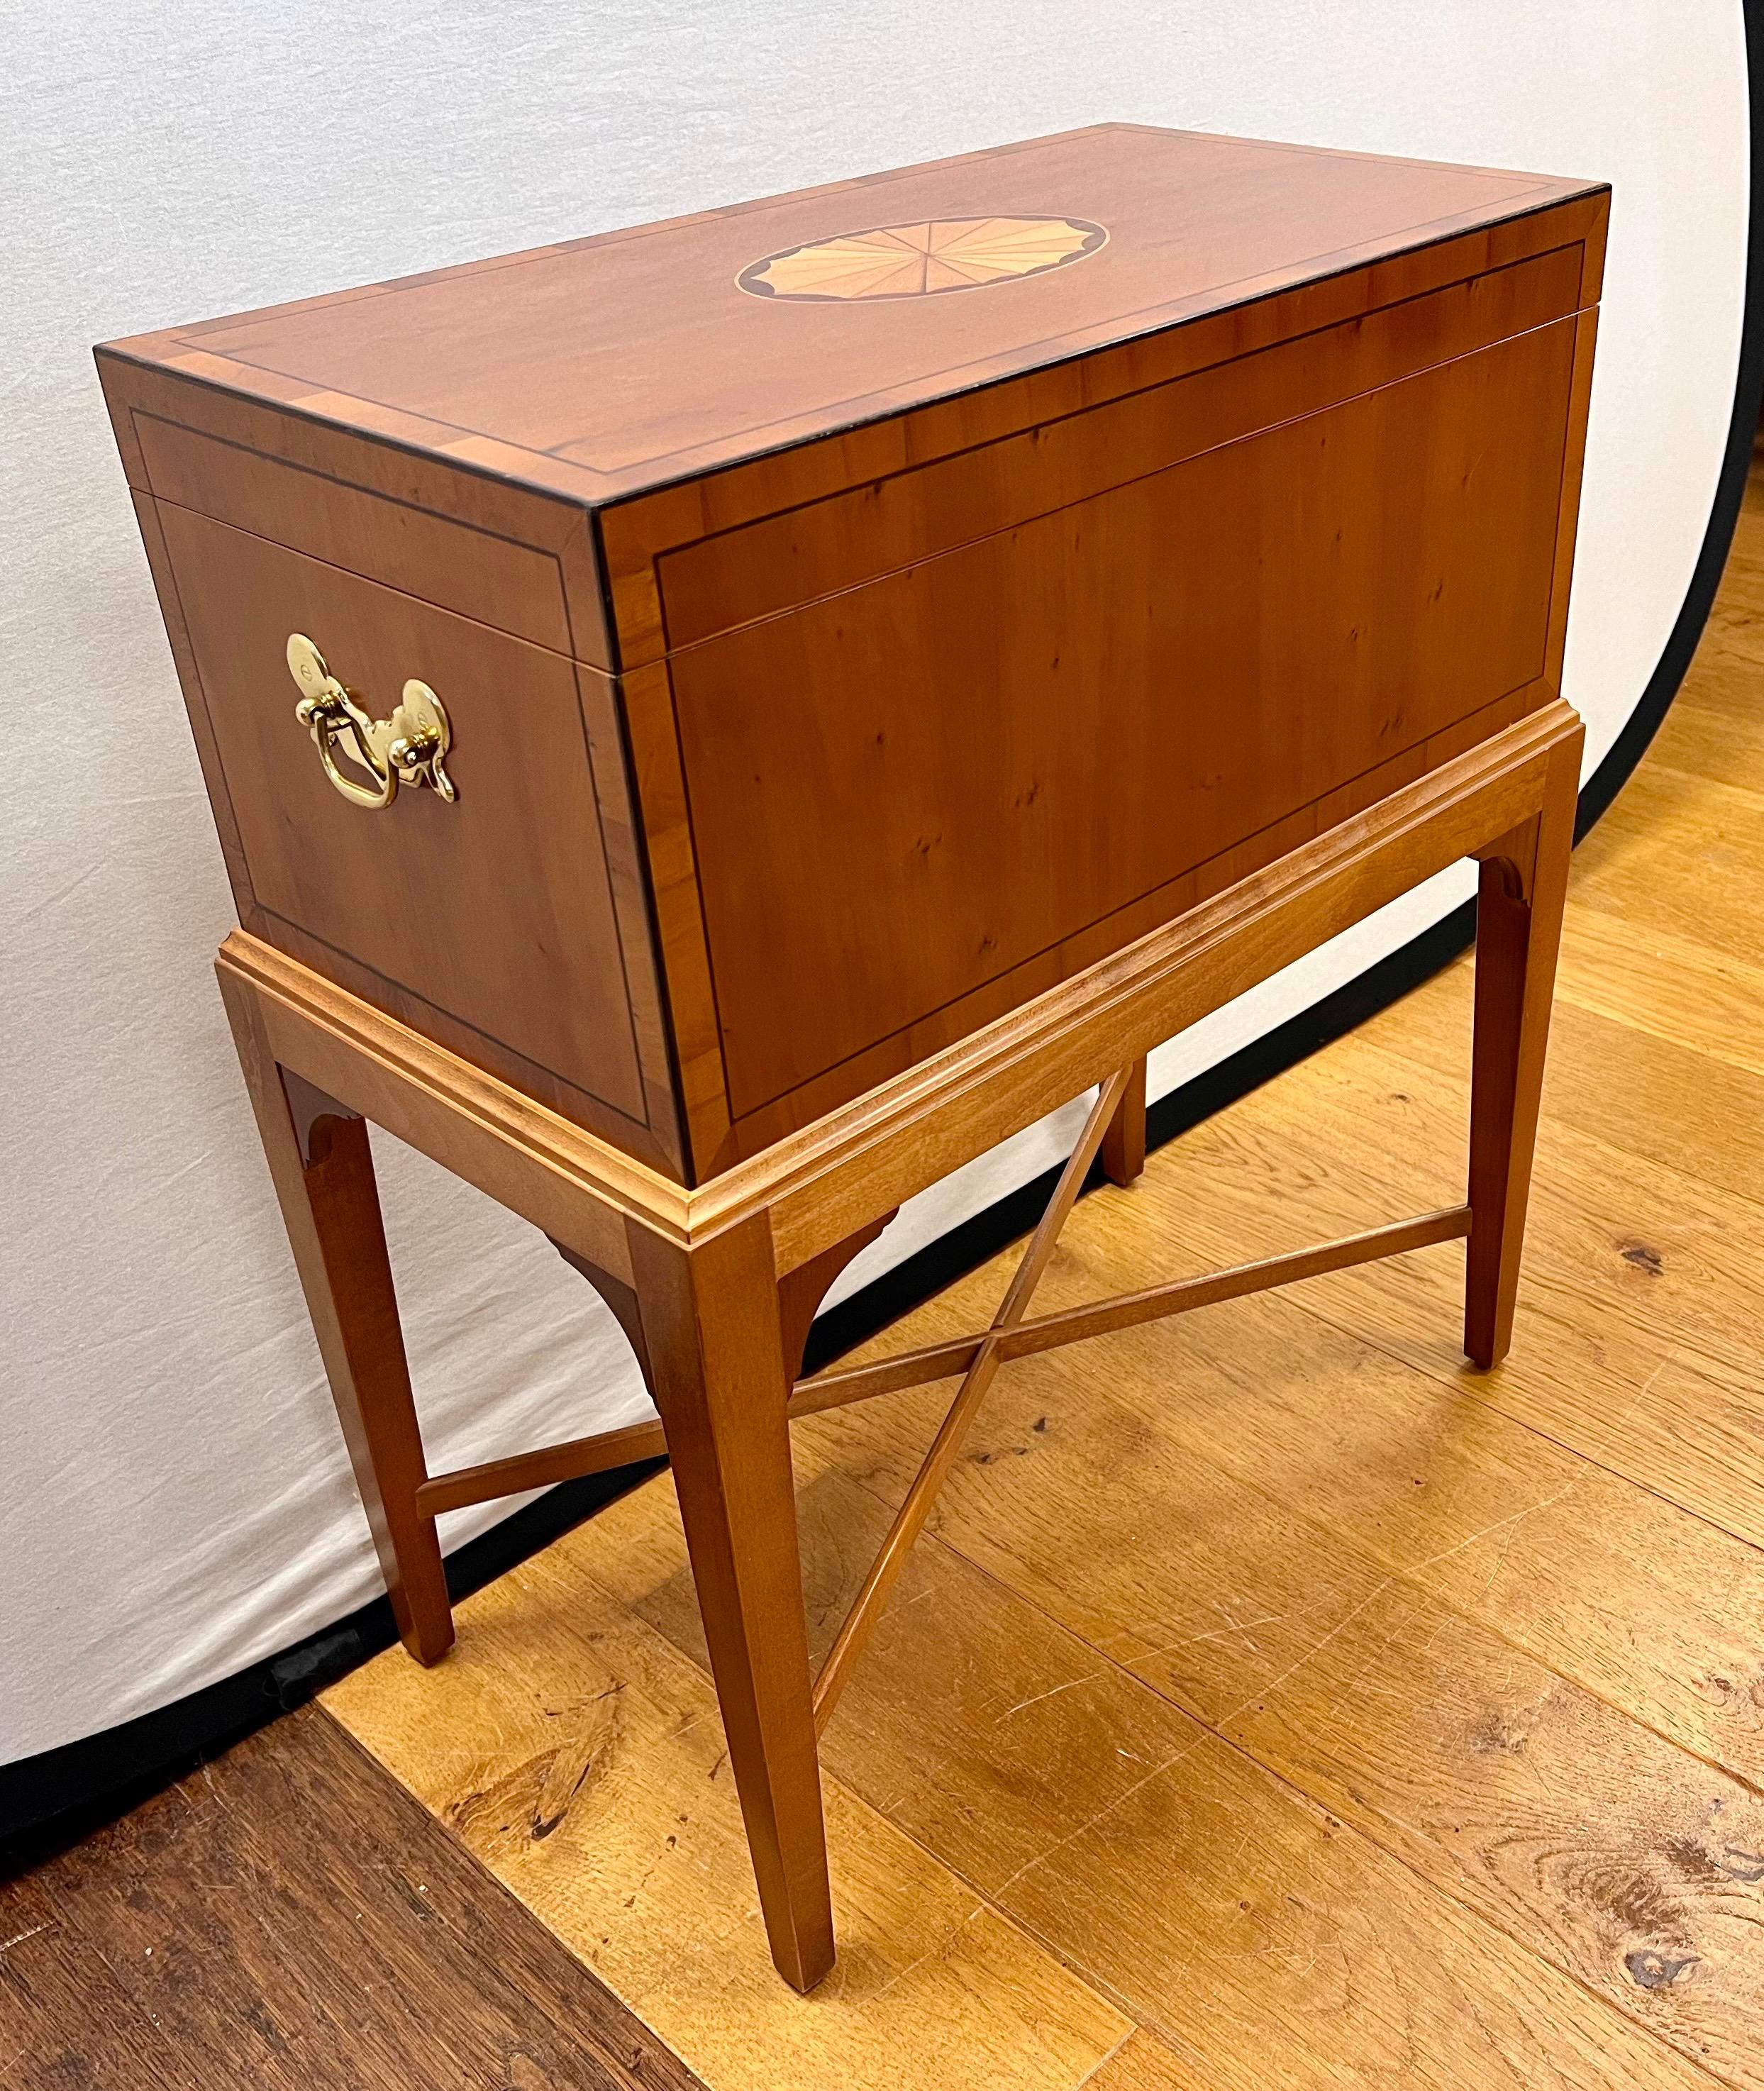 American Baker Furniture Mahogany Inlay Table with Small Chest Box on Stand for Storage